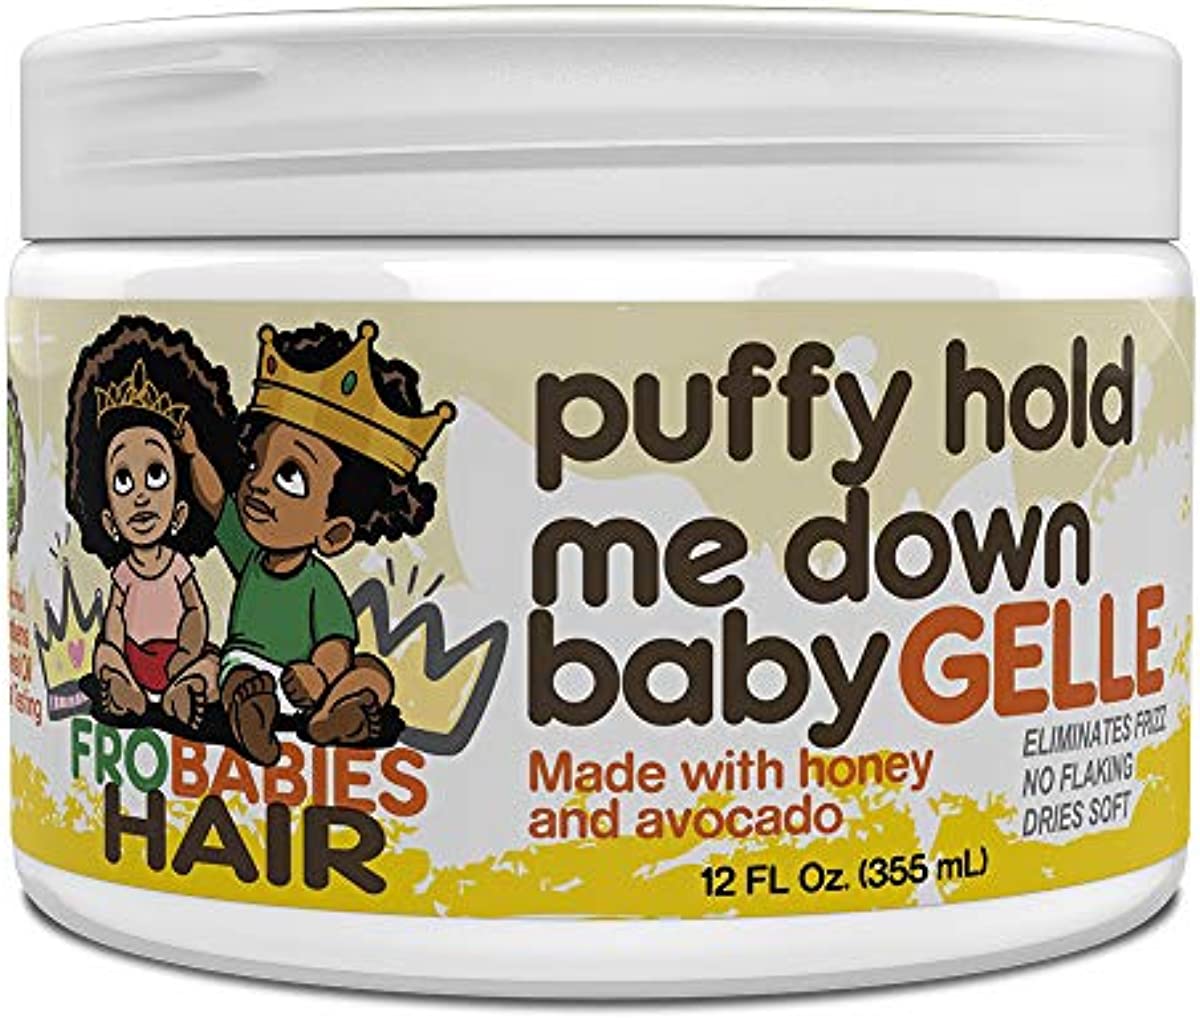 FroBabies Hair Puffy Hold Me Down Baby Gelle 12oz